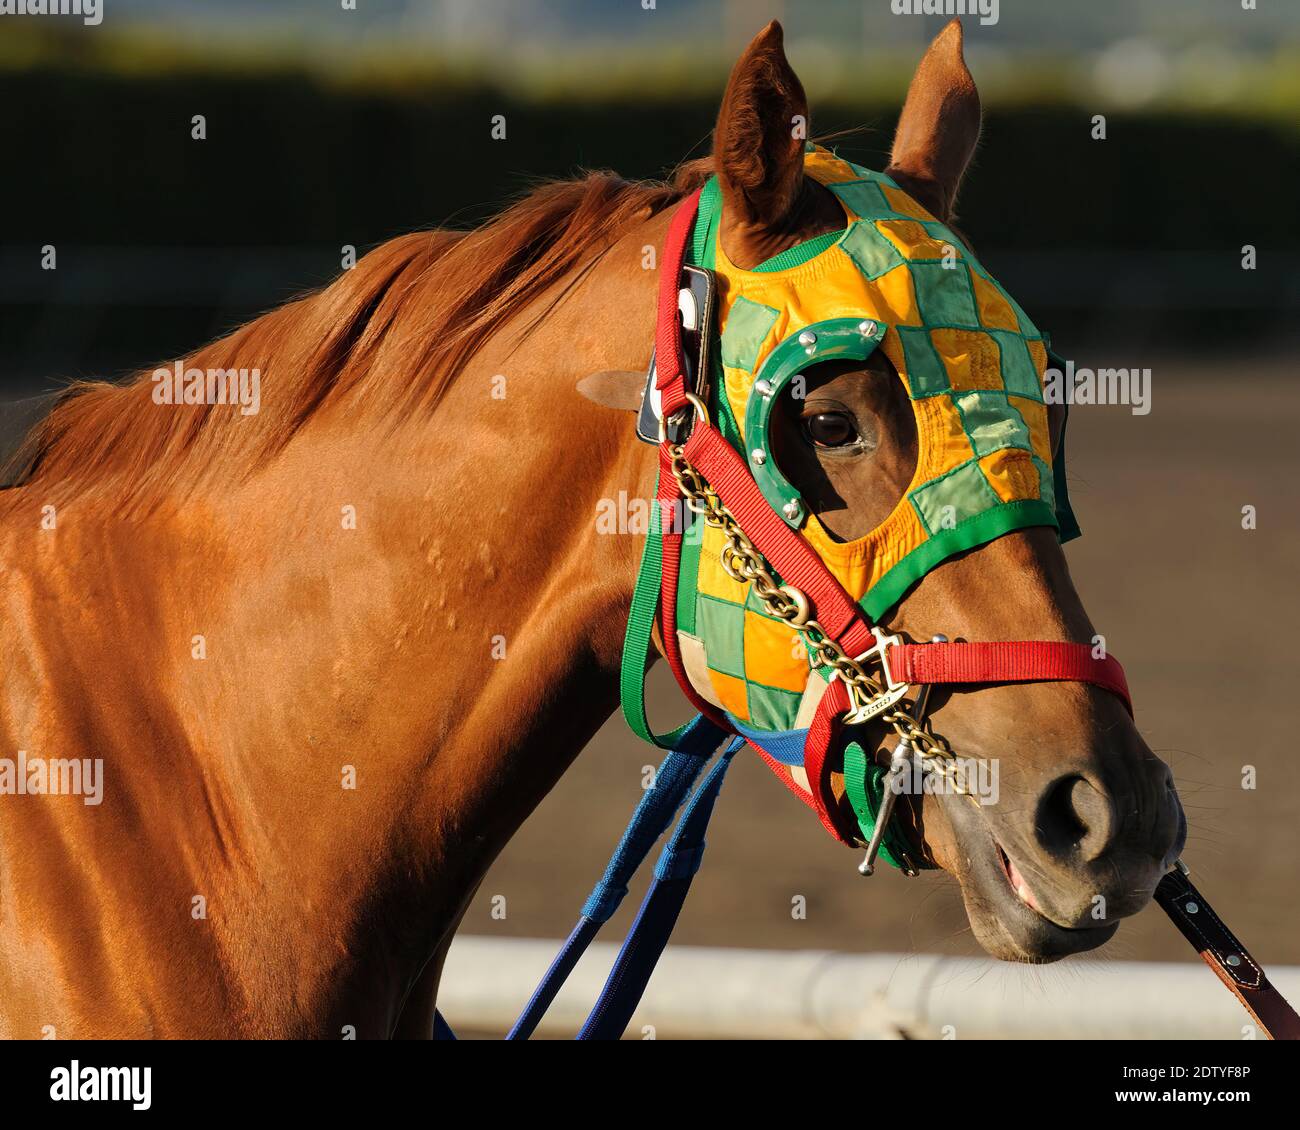 A race horse is led to the paddock at Emerald Downs, Auburn, WA wearing a gold and green blinder hood. Stock Photo